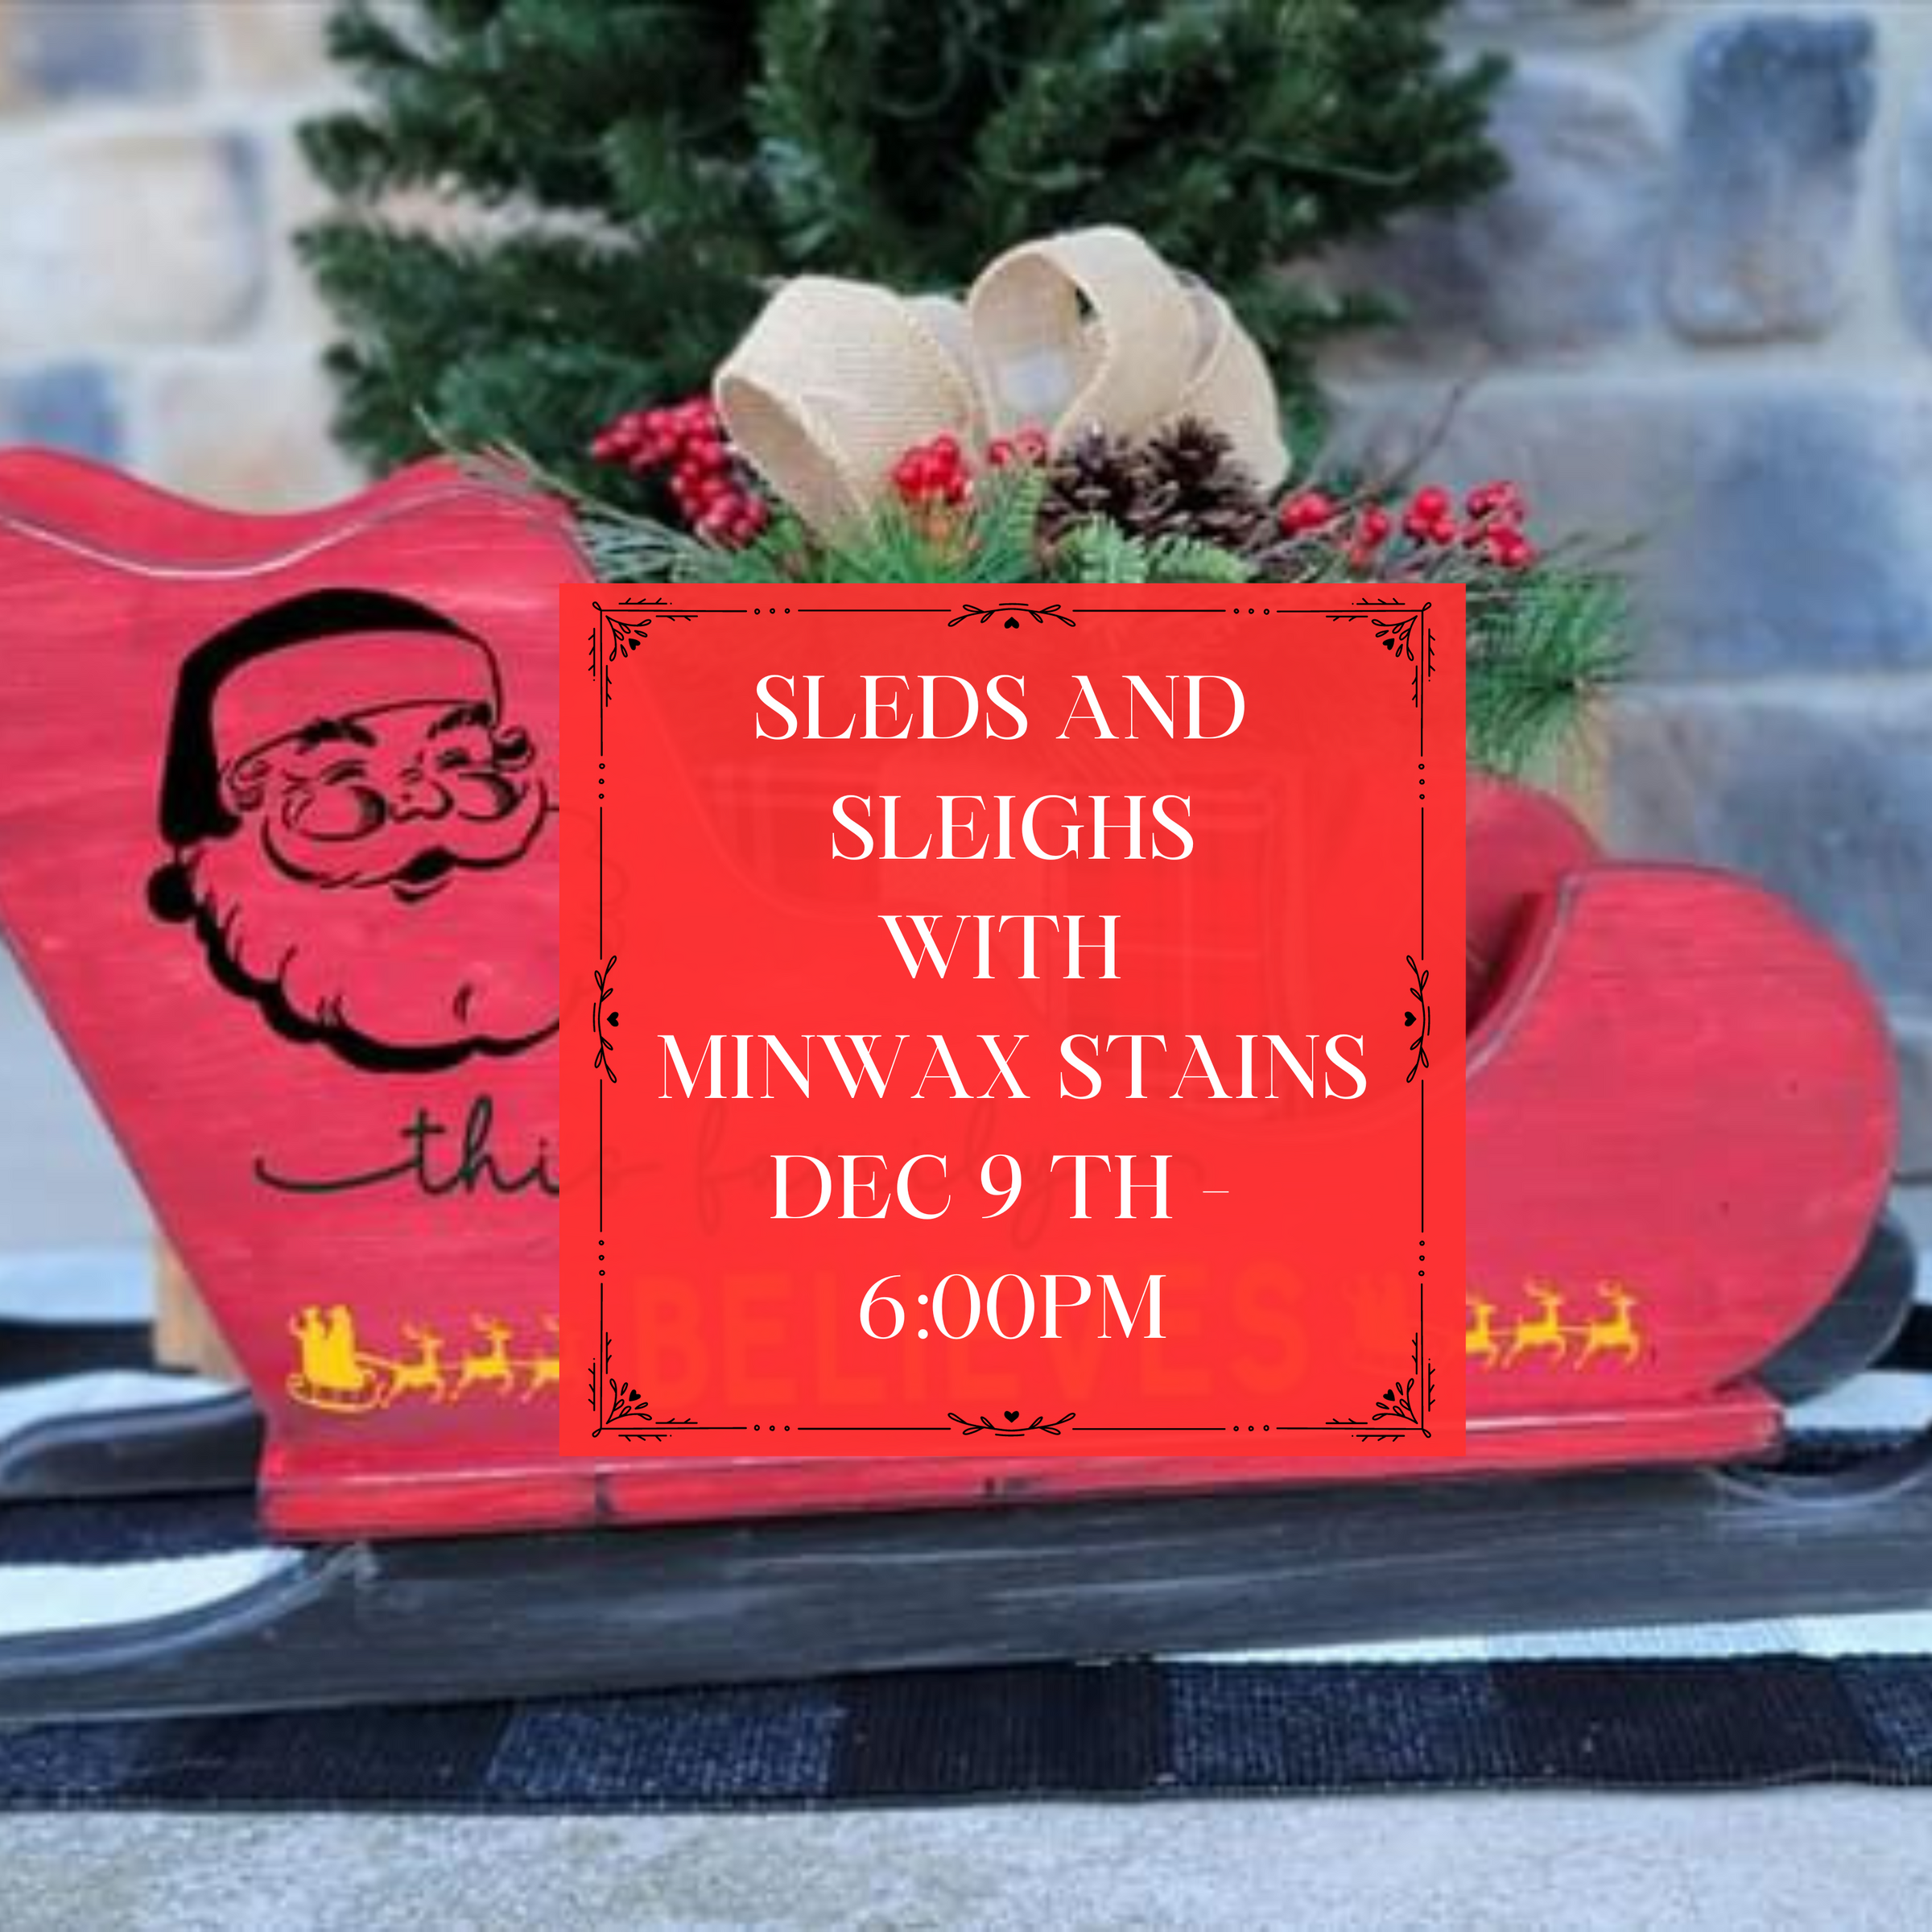 SLEDS AND SLEIGHS WITH MINWAX STAINS DEC 9TH, 2:00 PM